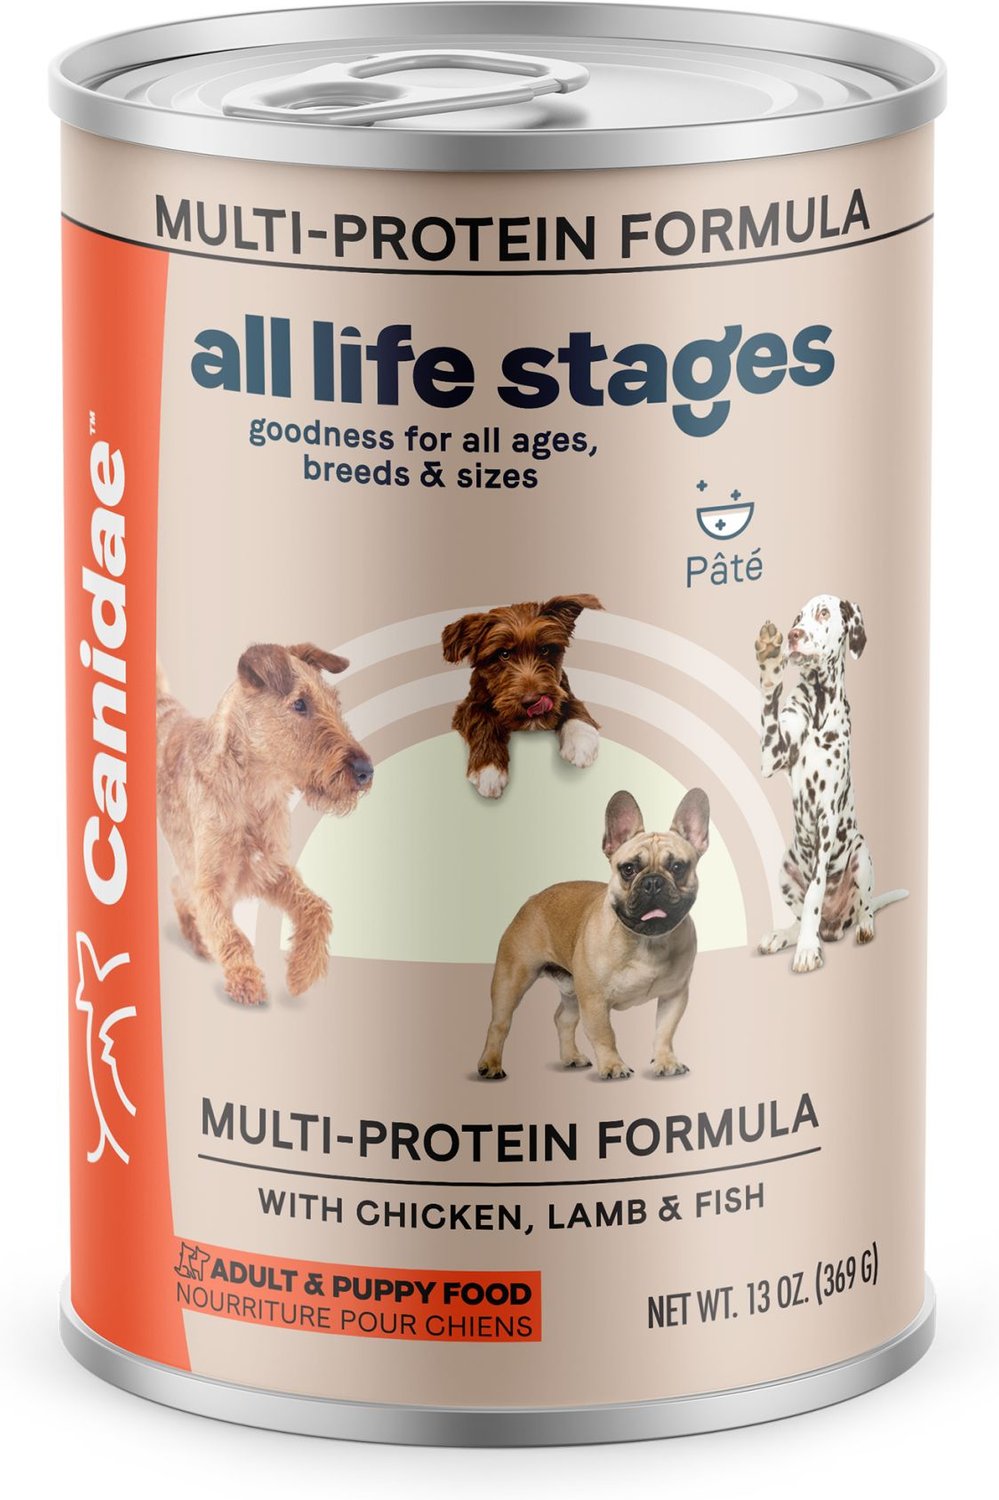 CANIDAE All Life Stages Formula Canned Dog Food, 13oz